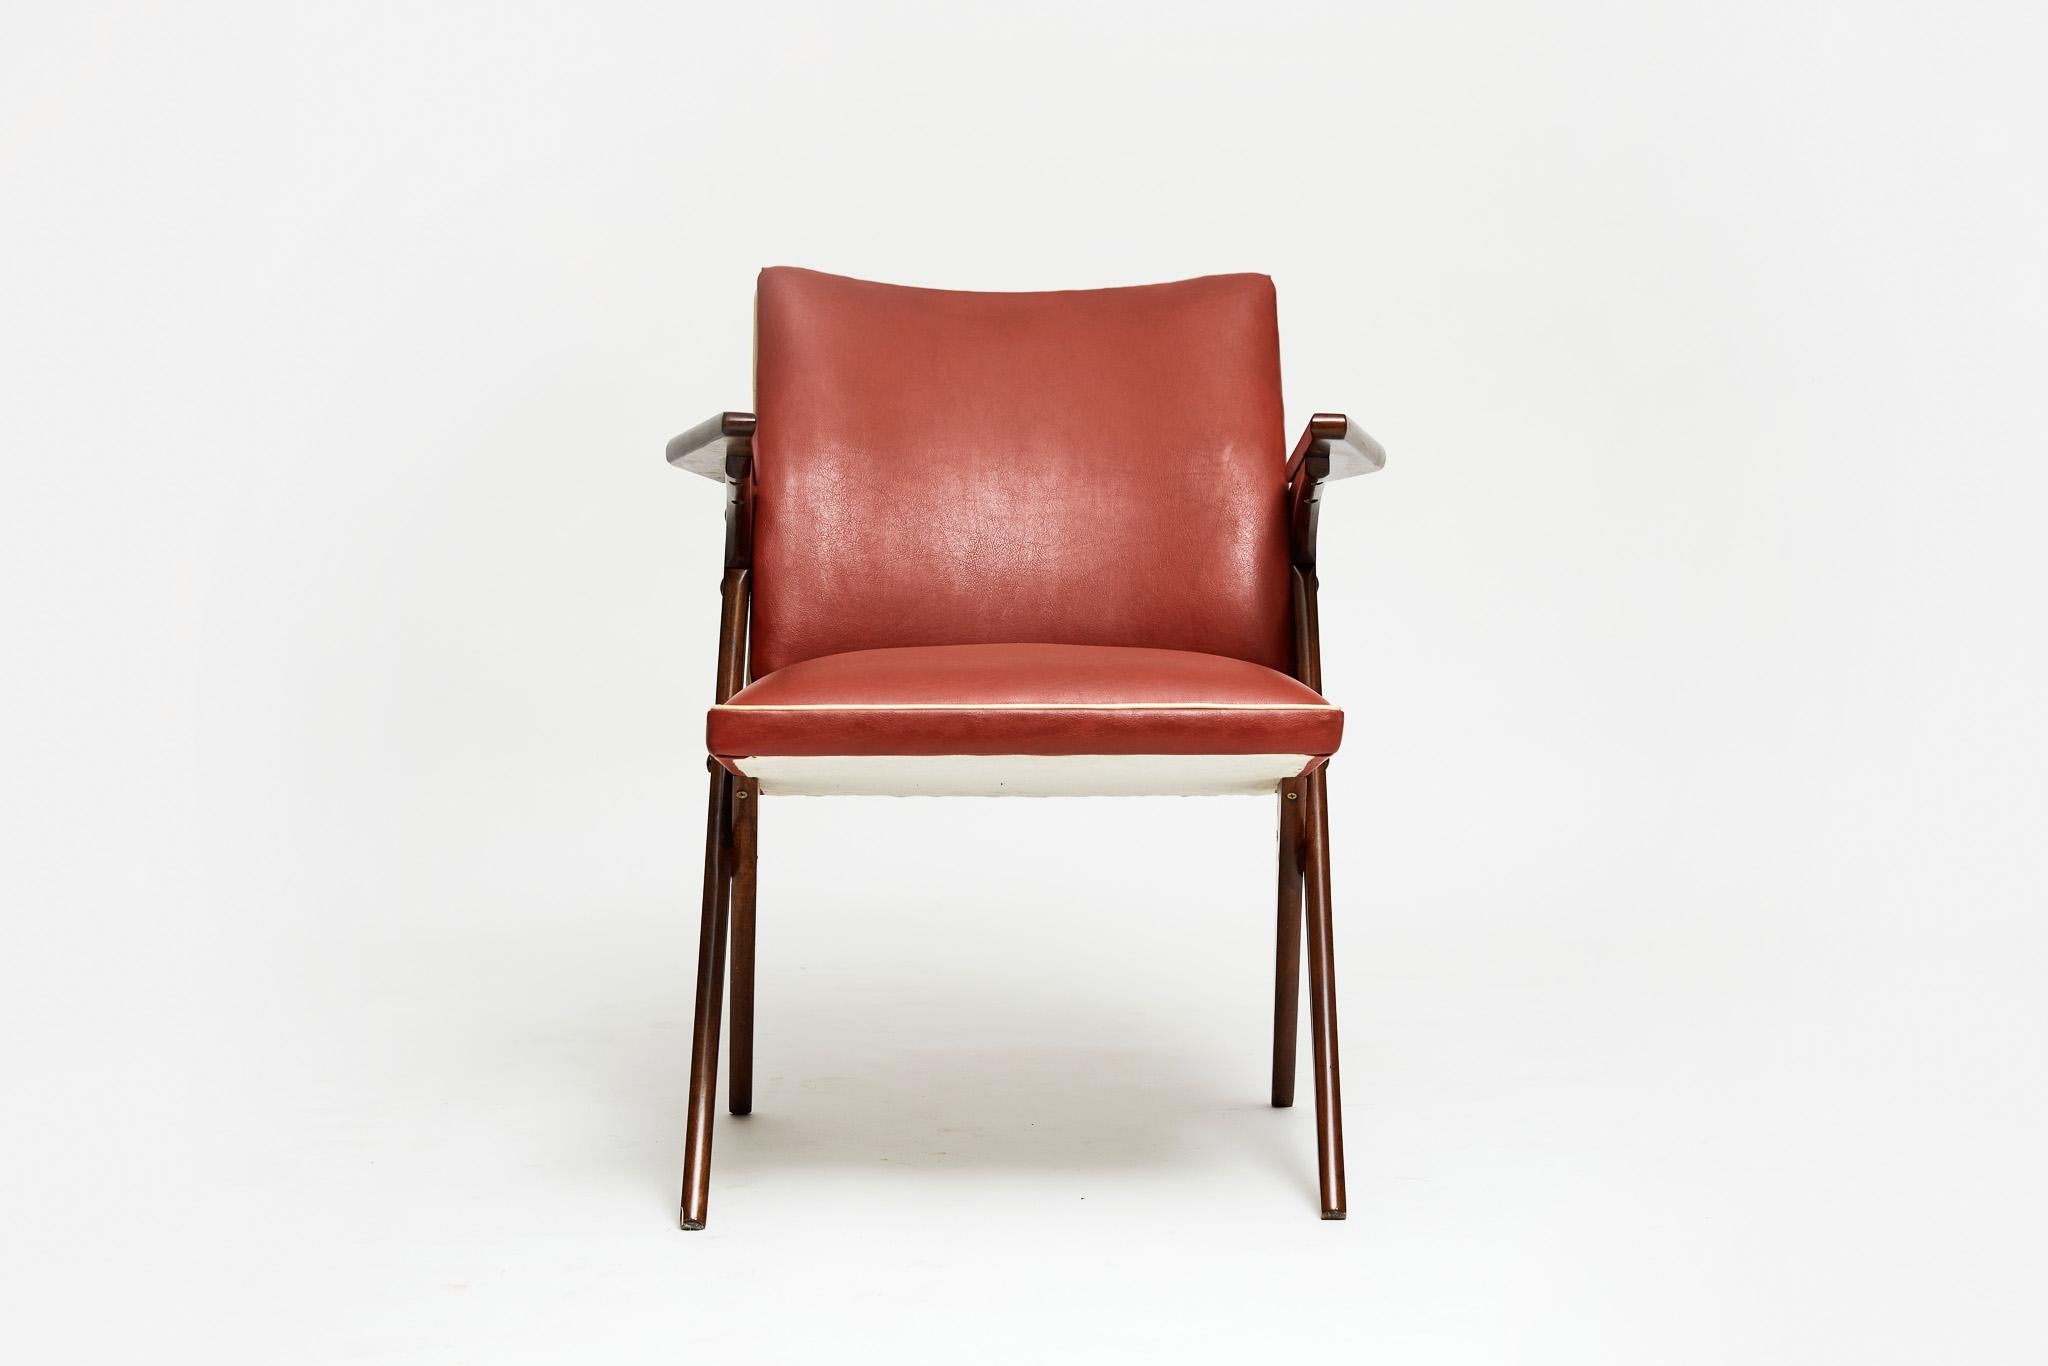 Brazilian Midcentury Armchair in Wood & Red Faux Leather by Jose Zanine Caldas, 1950s